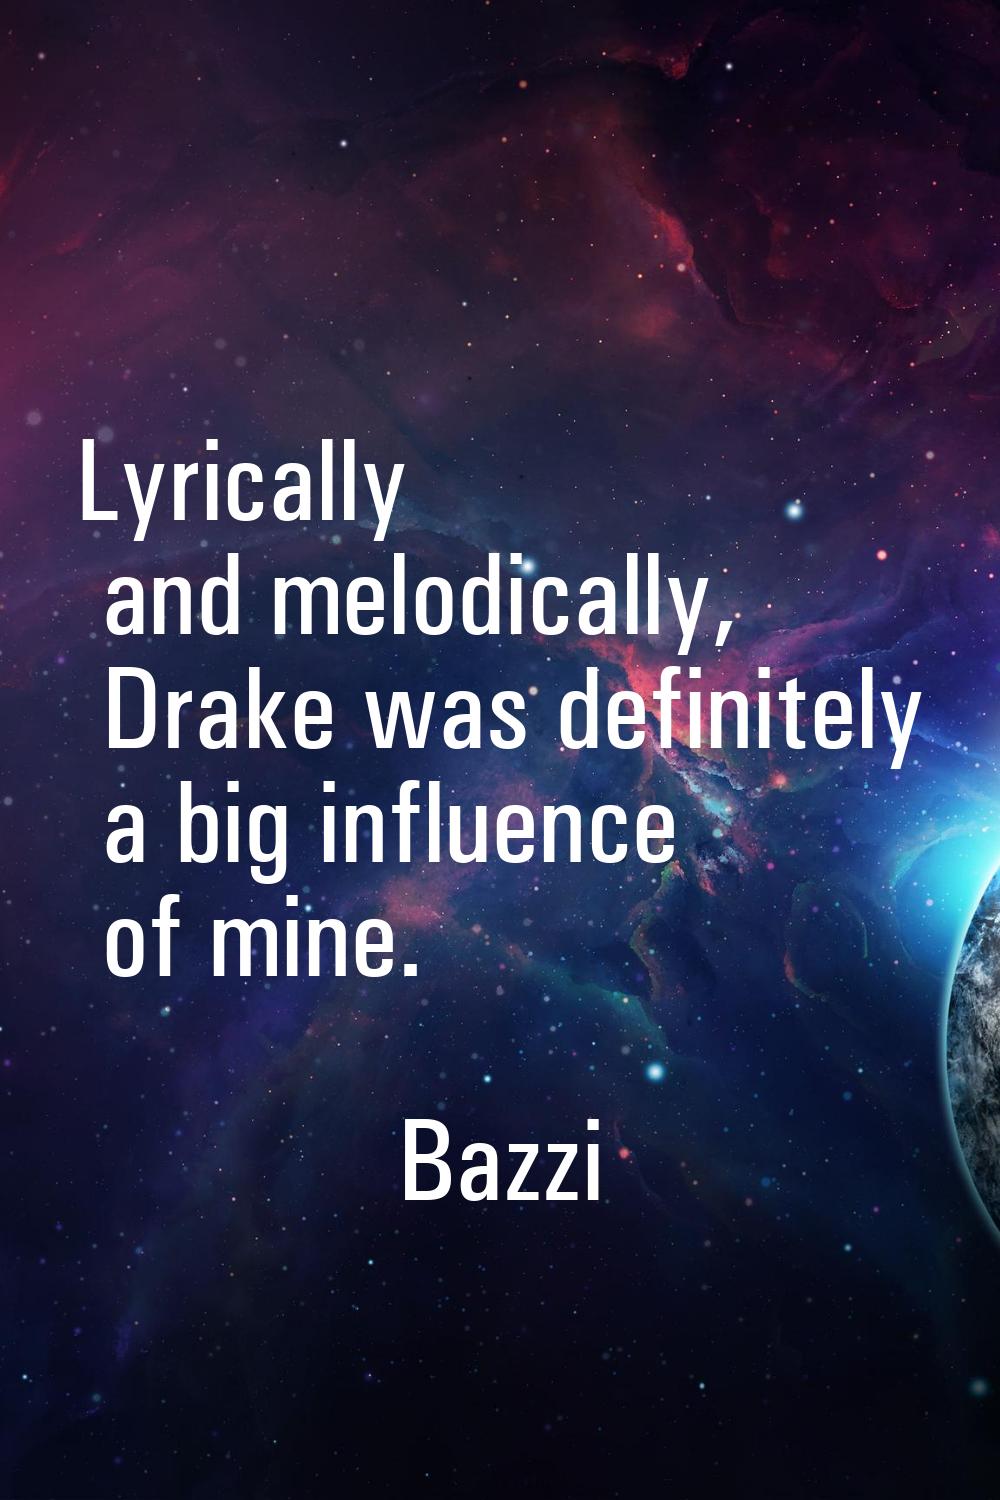 Lyrically and melodically, Drake was definitely a big influence of mine.